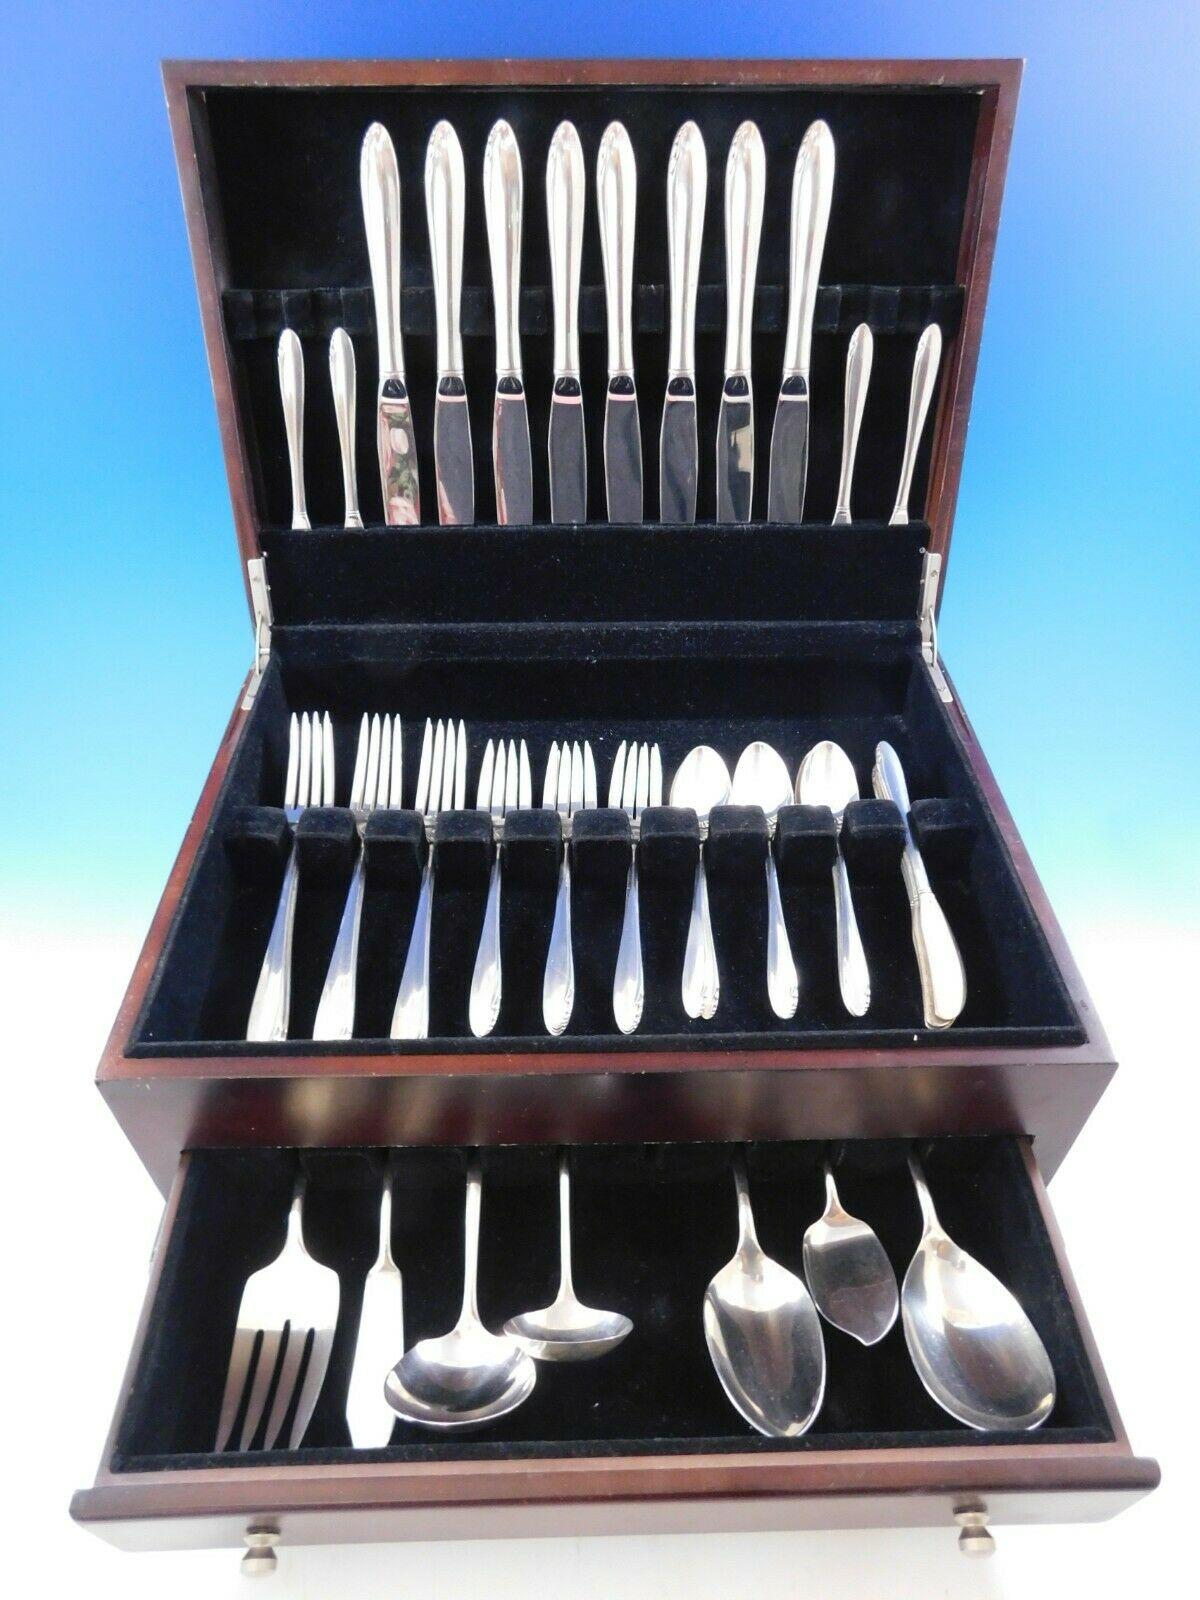 Scarce dinner size lasting spring by Oneida sterling silver flatware set, 46 pieces. This pattern has a timeless, Mid-Century Modern design. This set includes:

8 dinner size knives, 9 5/8